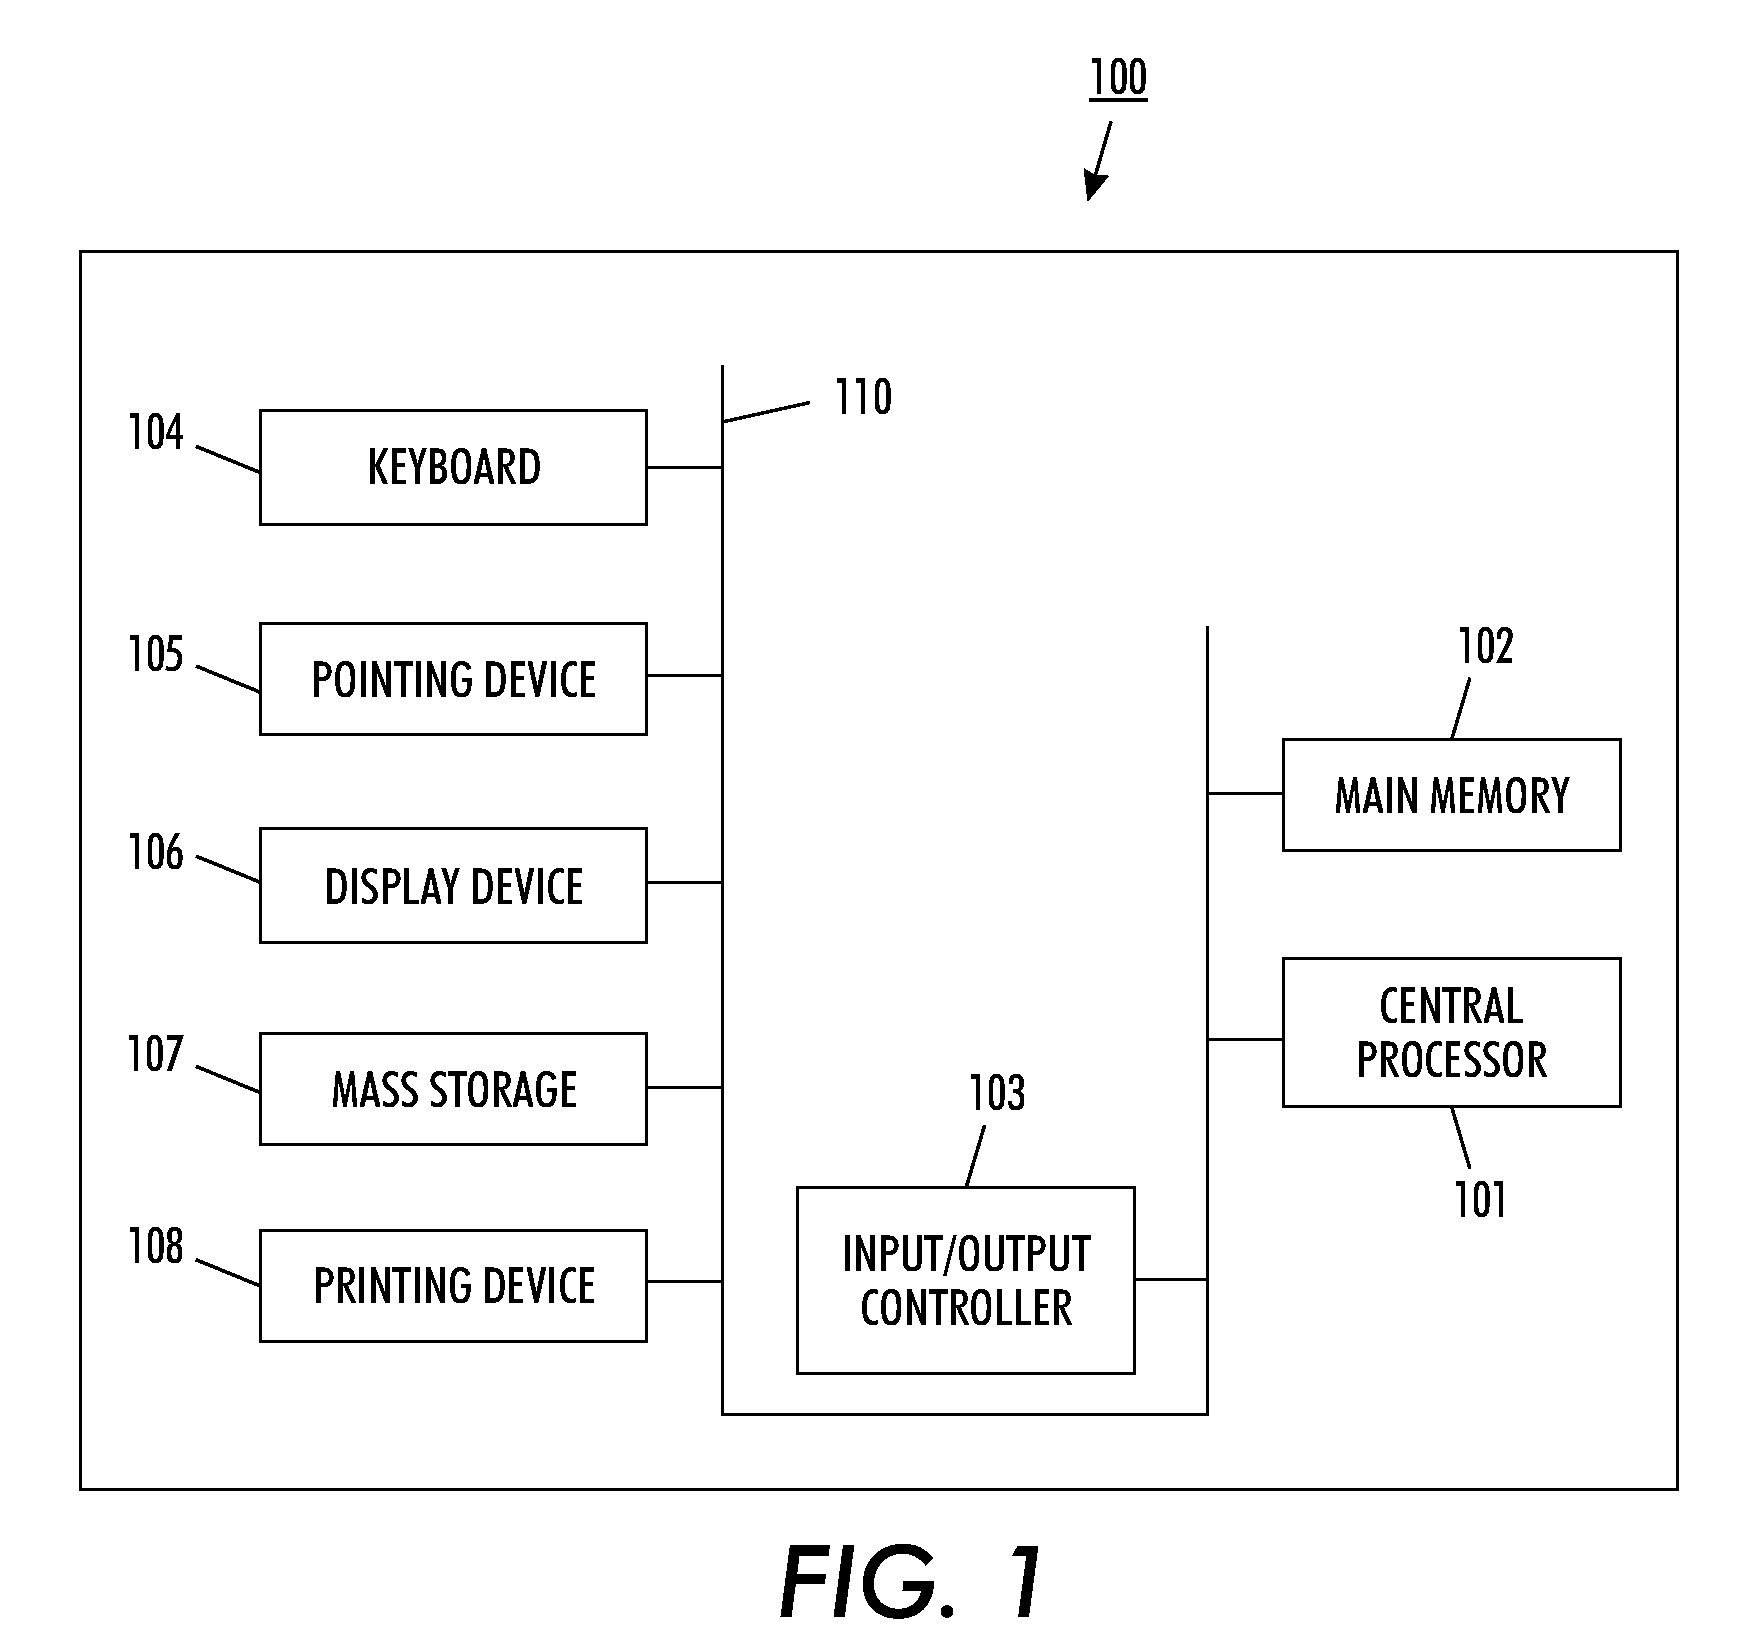 Test and answer key generation system and method